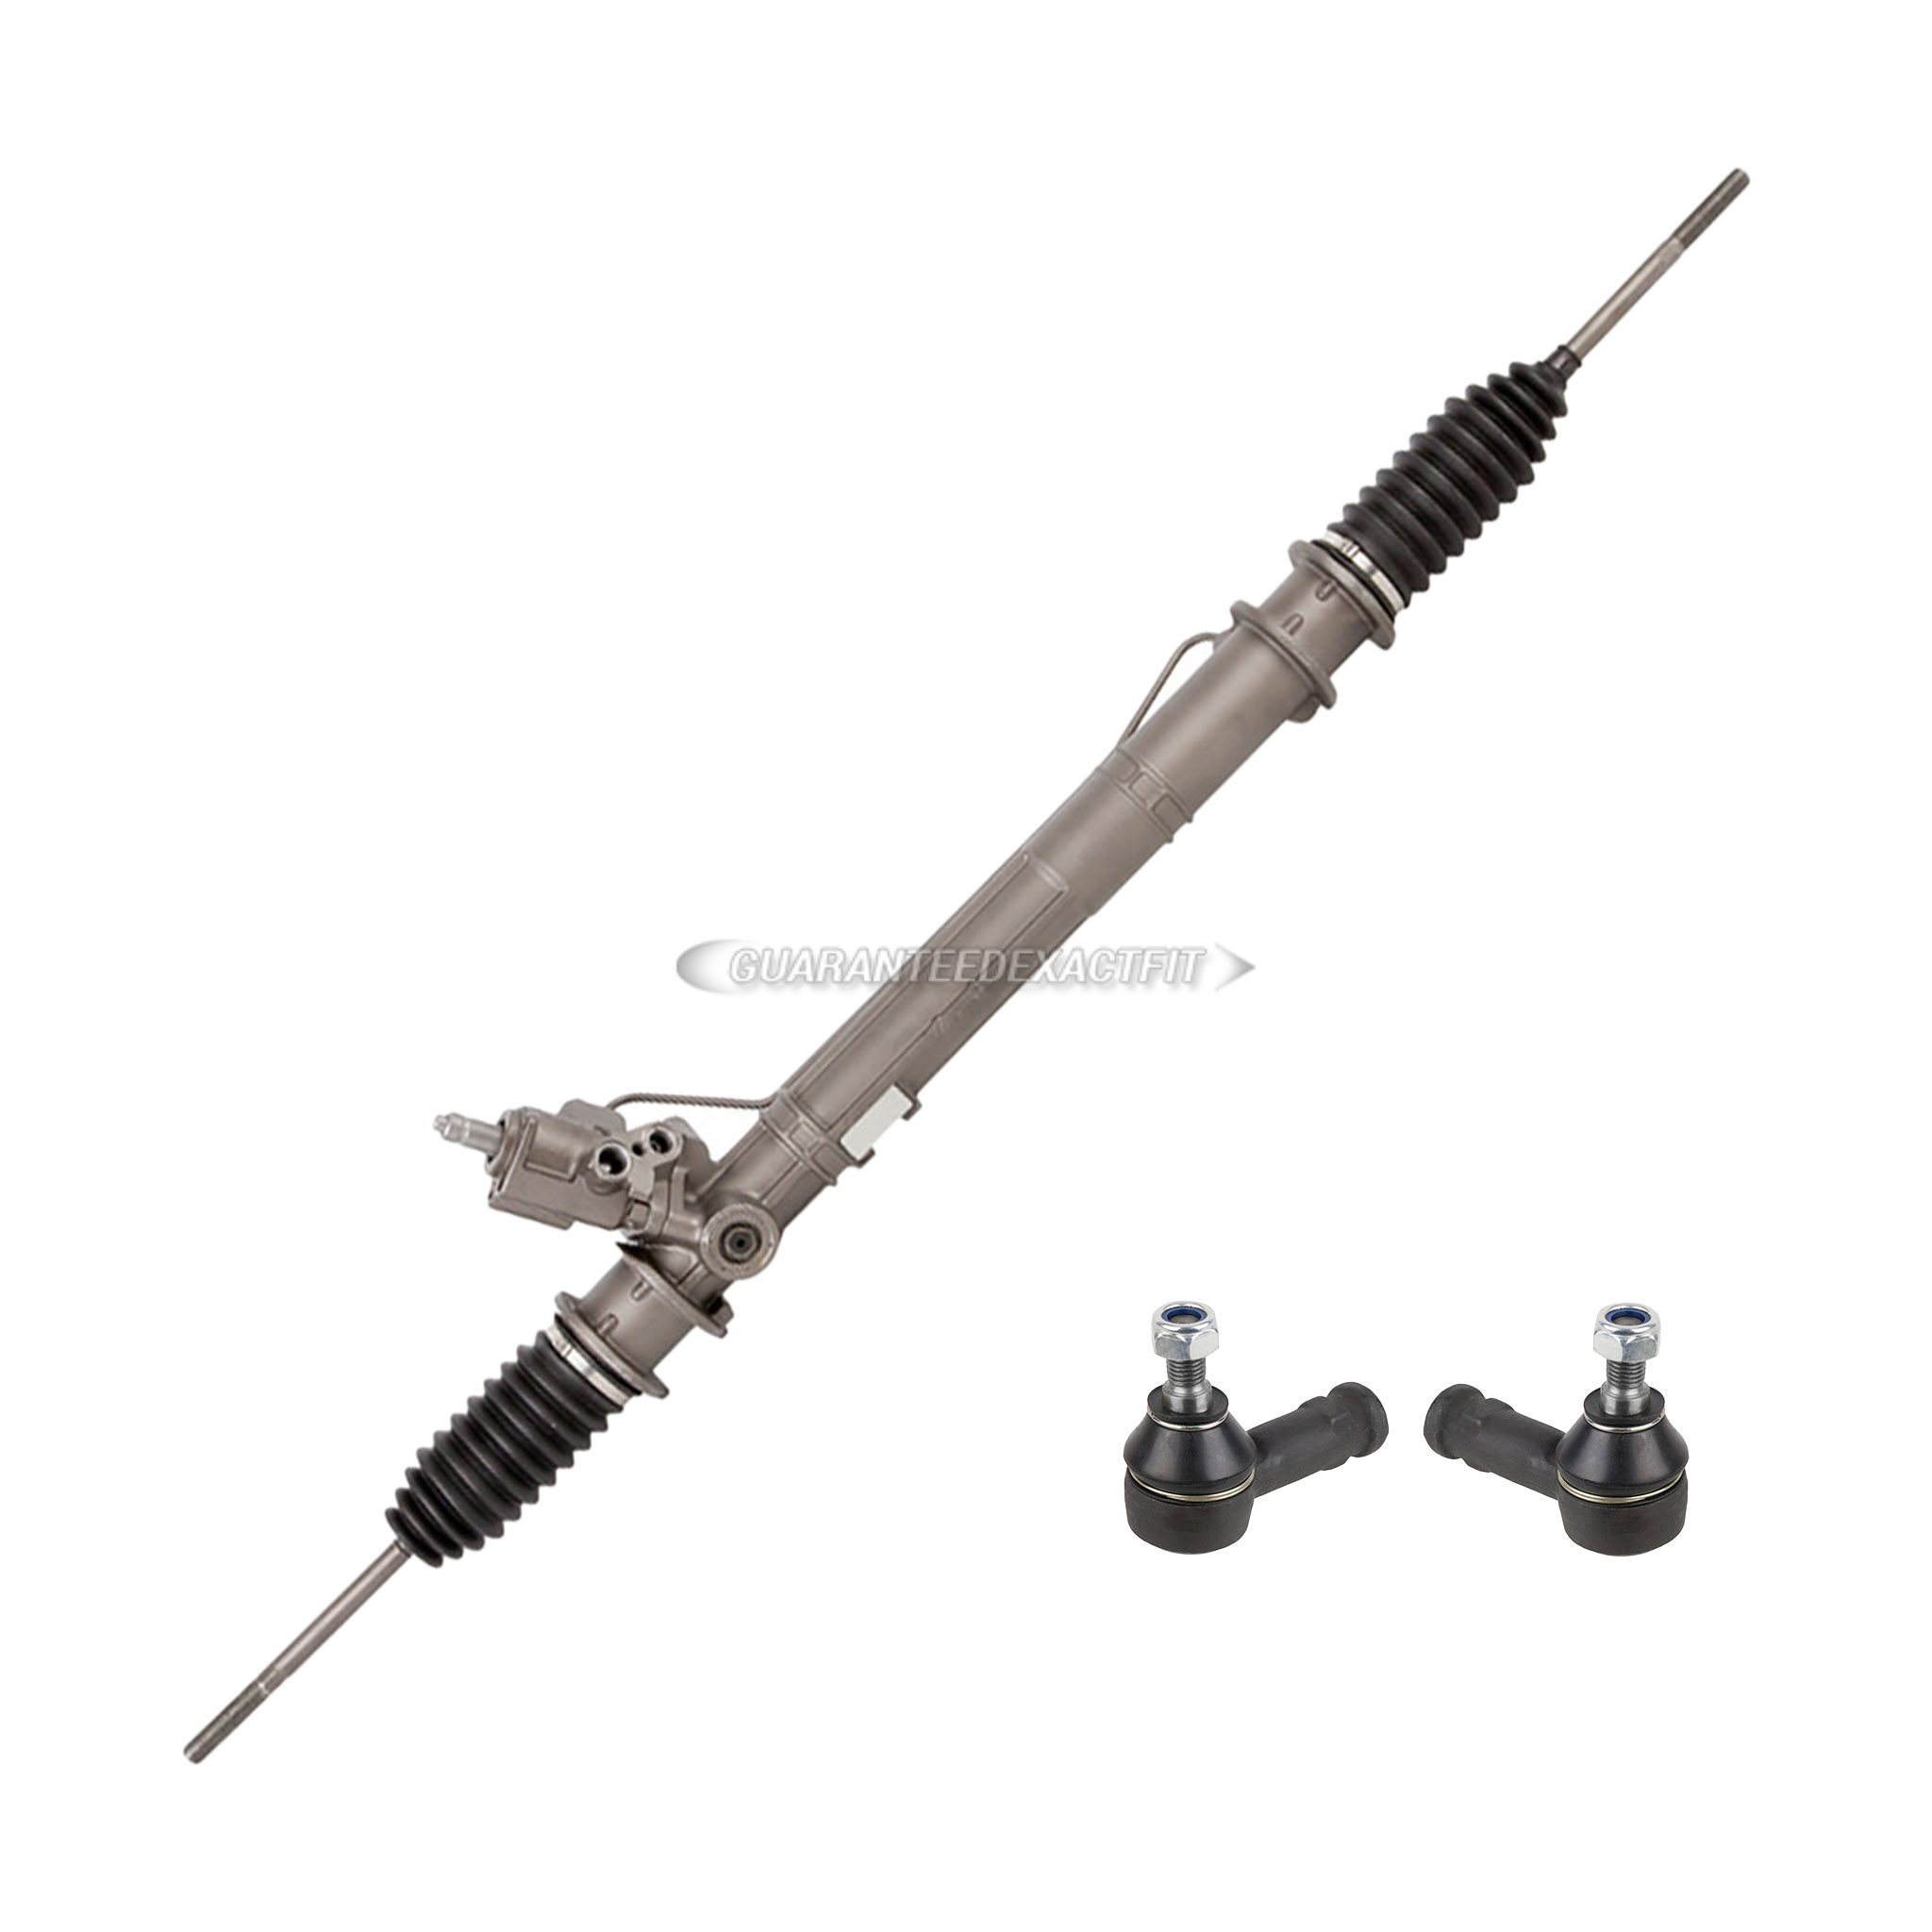  Jaguar Xk8 rack and pinion and outer tie rod kit 